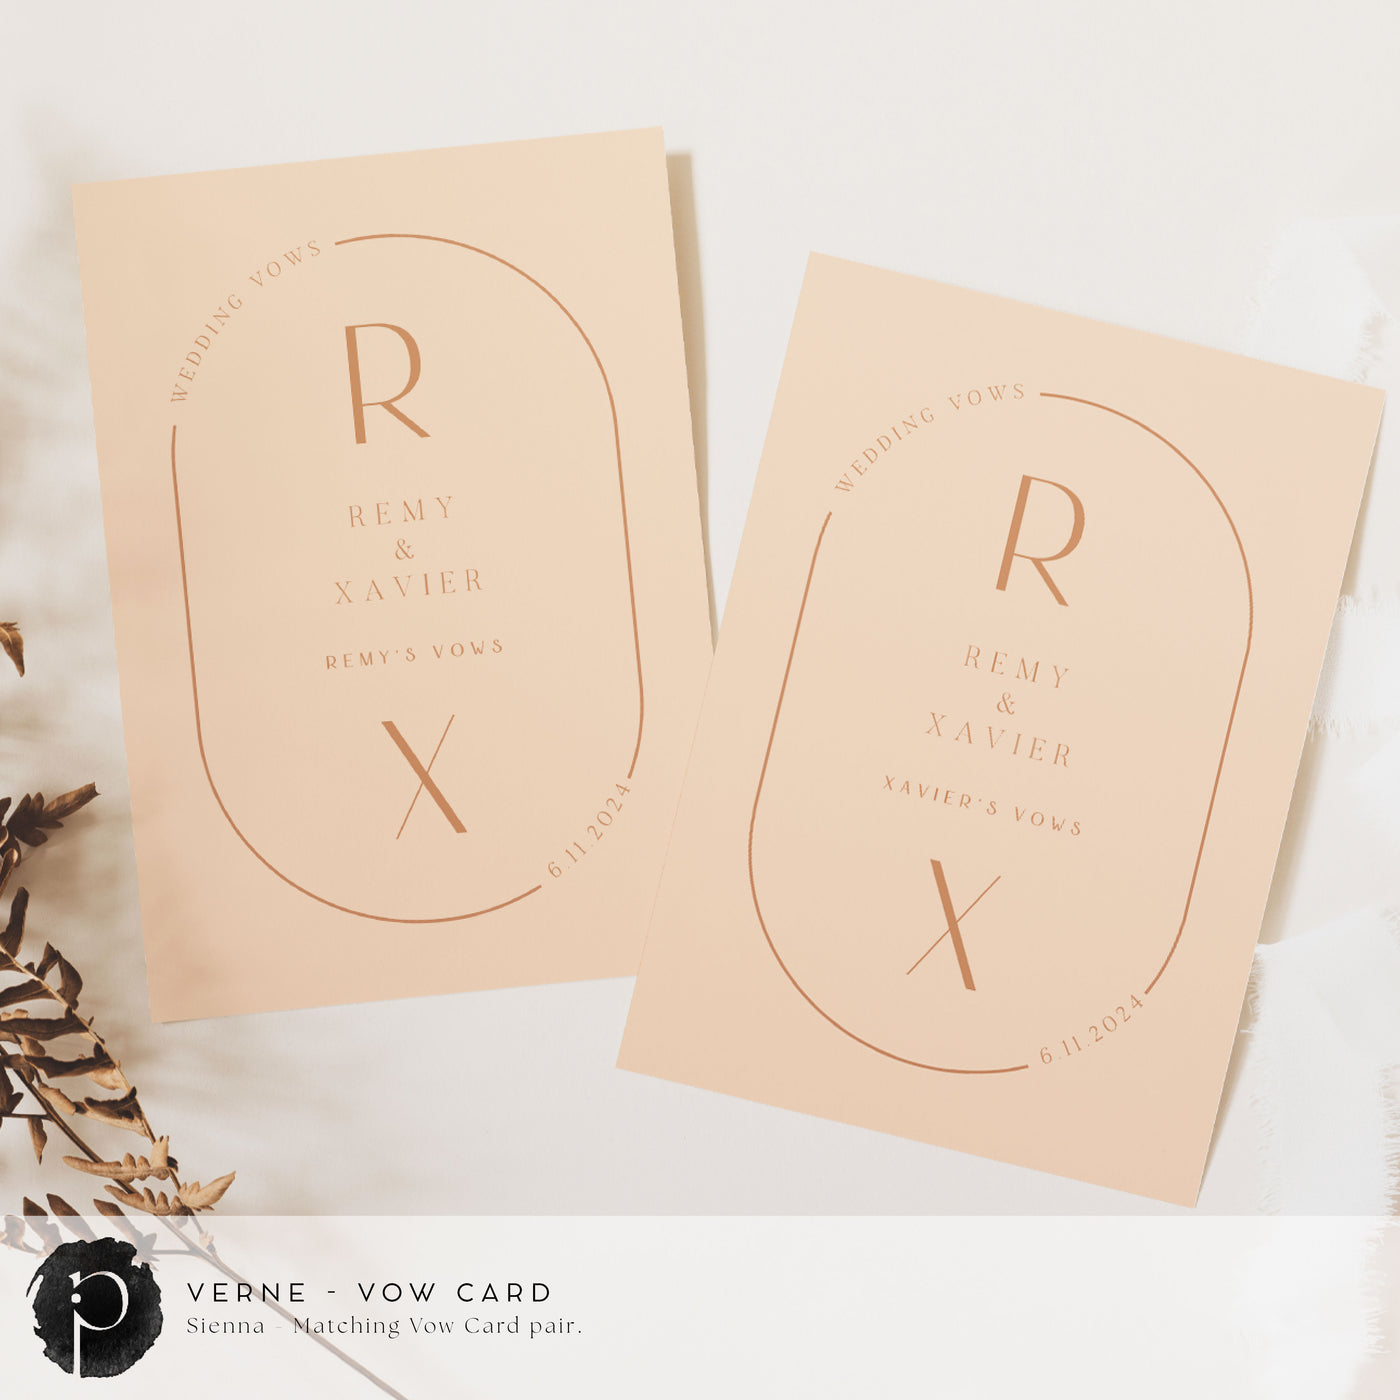 A pair of vow cards to write your wedding vows on in a modern midcentury wedding theme with light terracotta text on a soft peach background